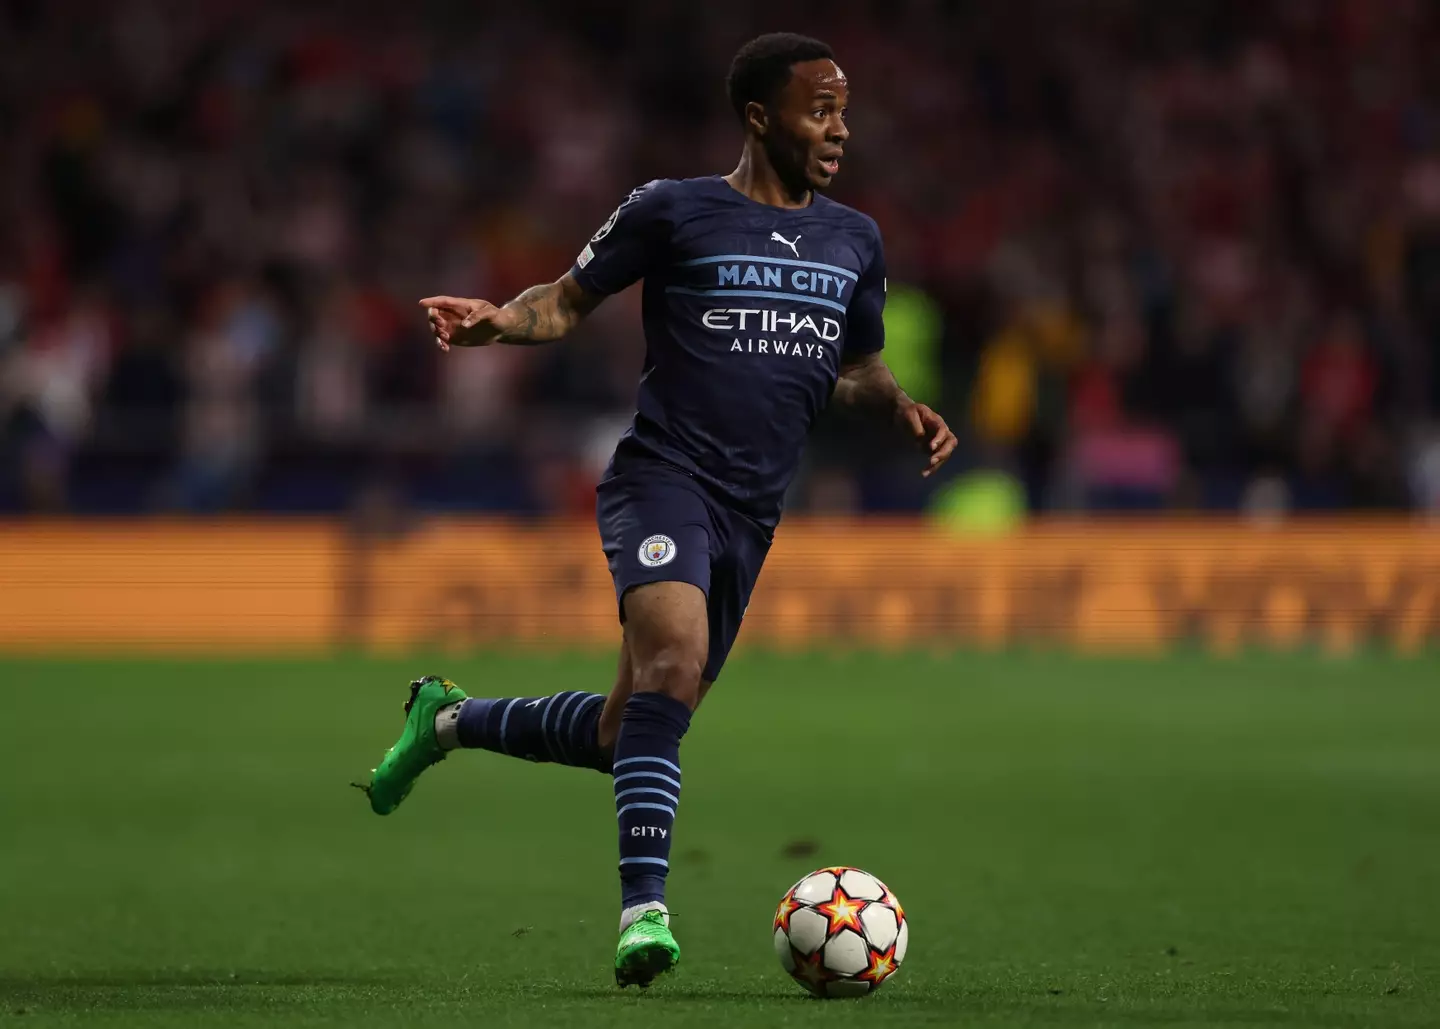 Raheem Sterling in action against Atletico Madrid for Manchester City in the Champions League quarter-finals. (Alamy)